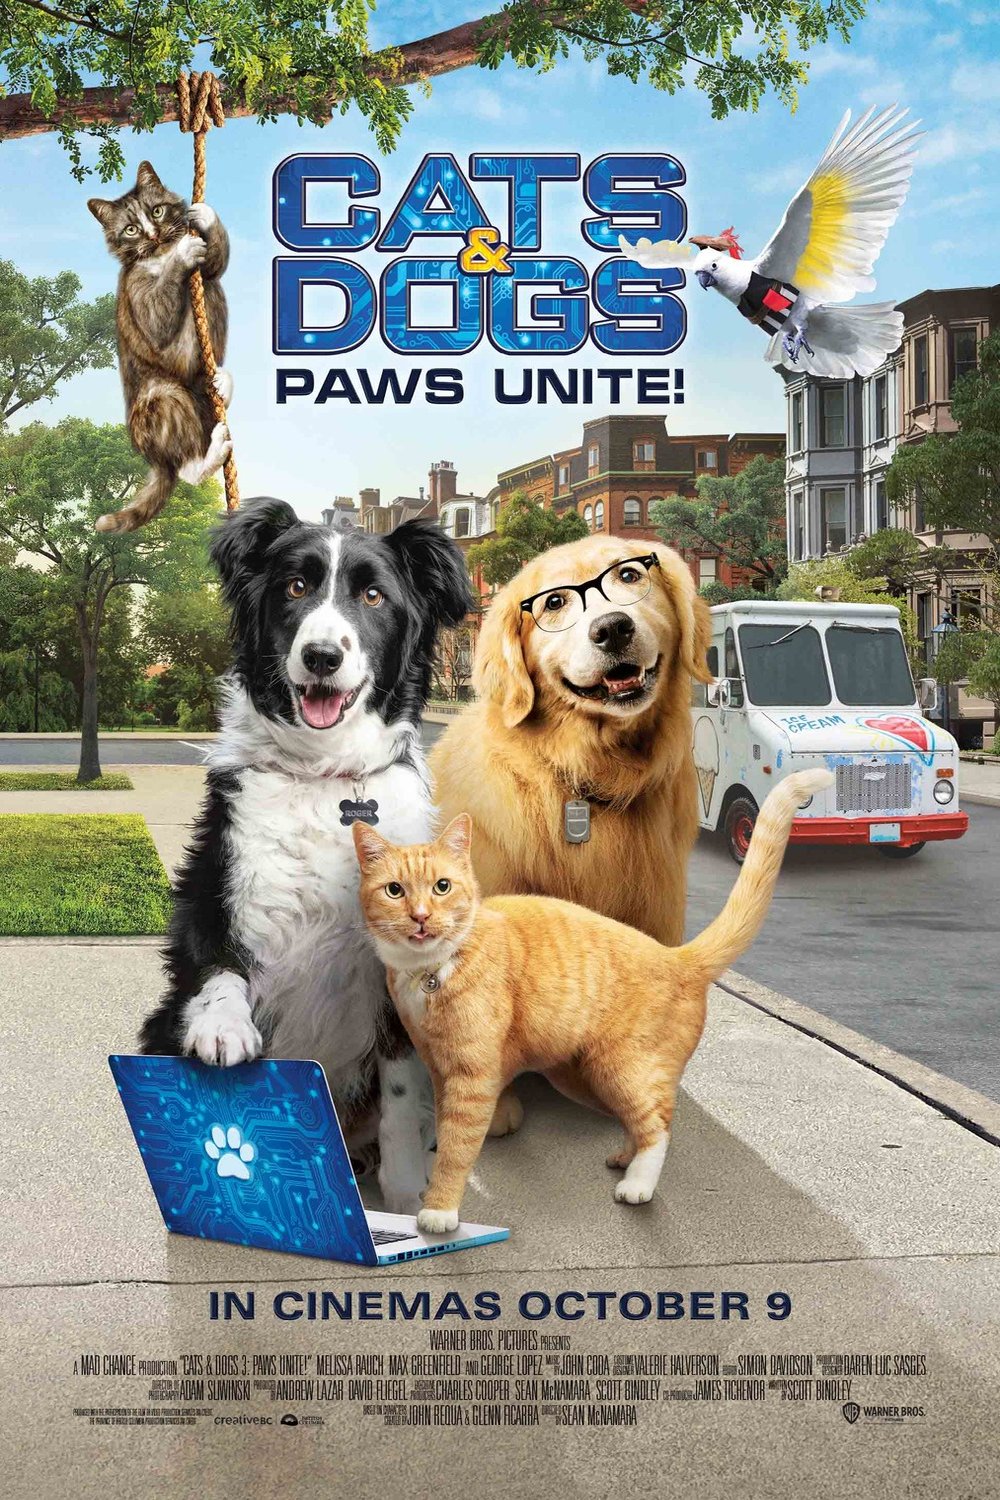 Poster of the movie Cats & Dogs 3: Paws Unite